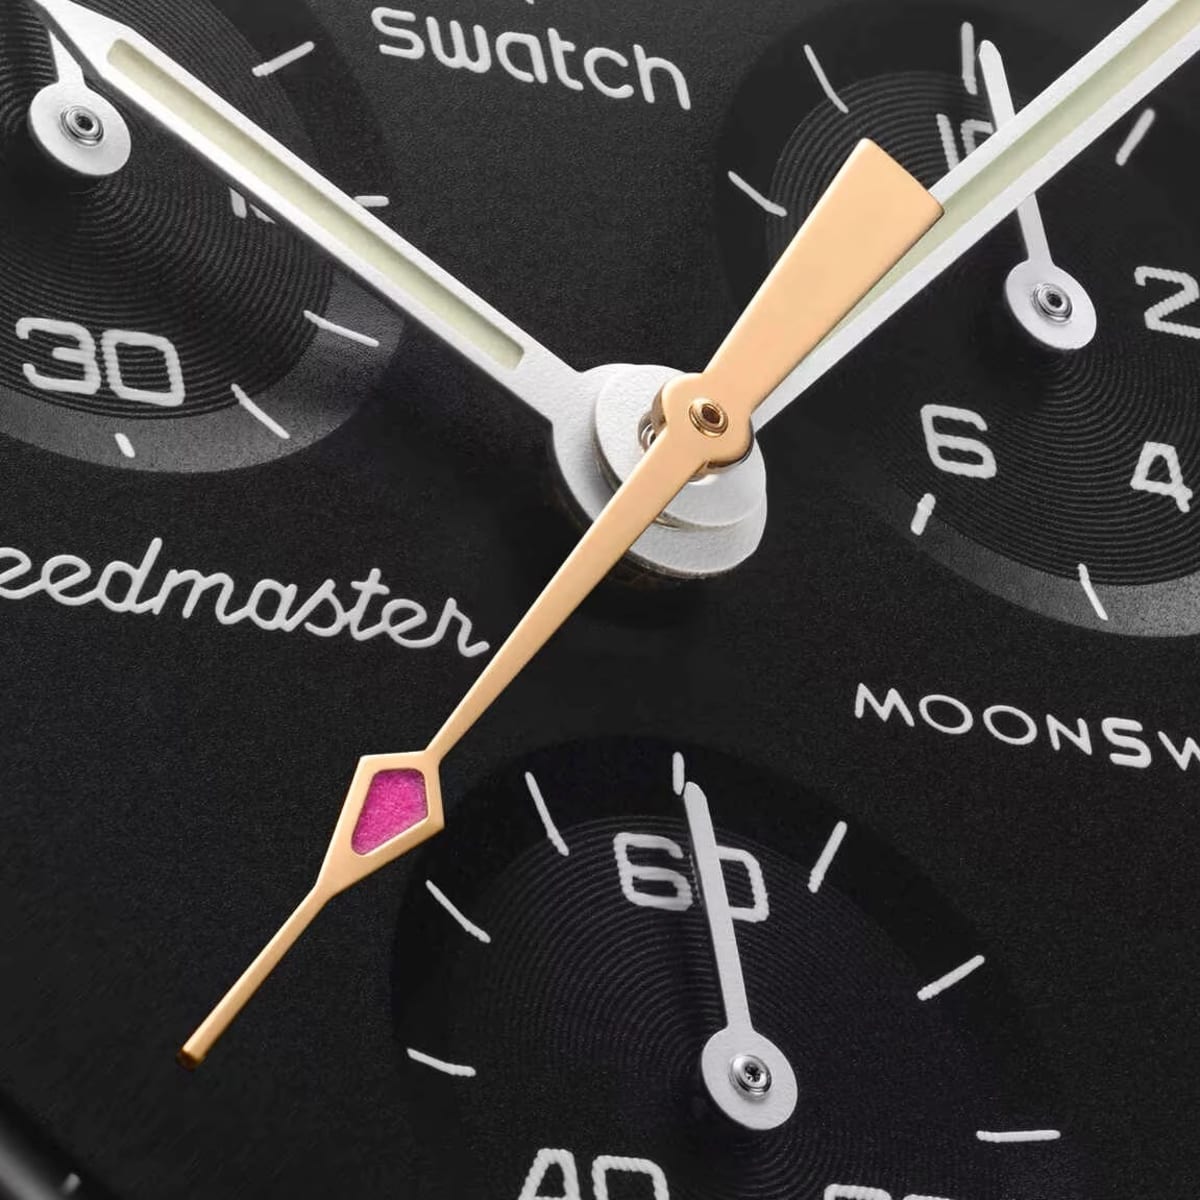 Swatch and Omega release a new variant of the Moonshine Gold ...